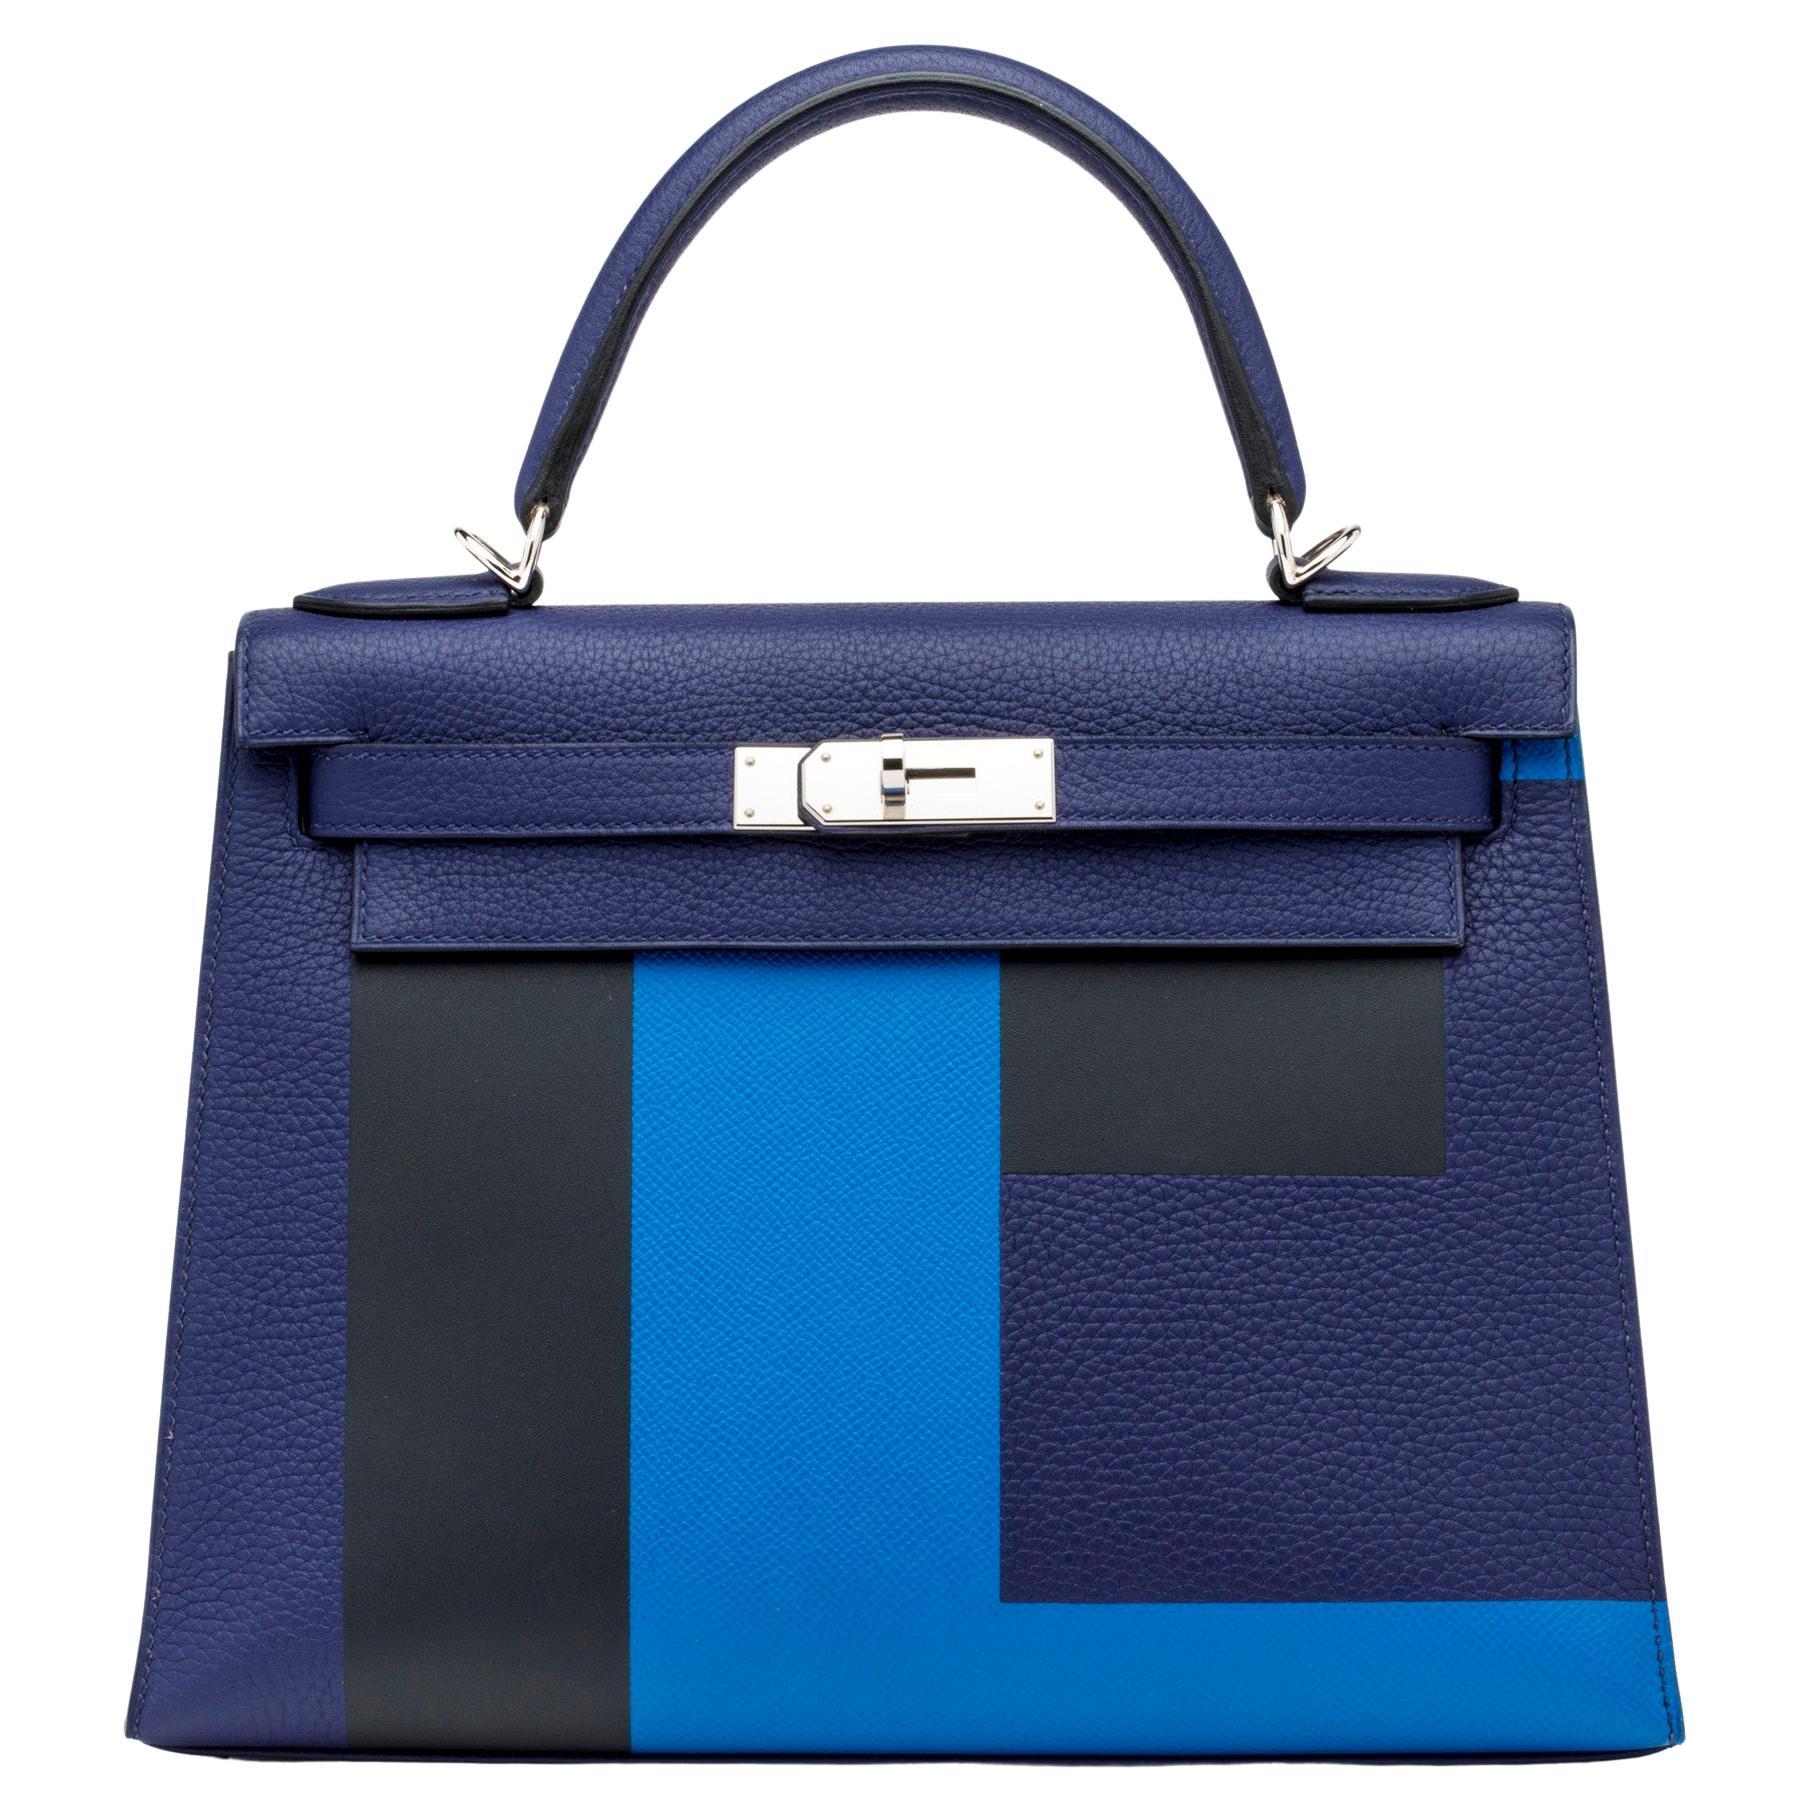 Hermés Clemence Special Edition Kelly